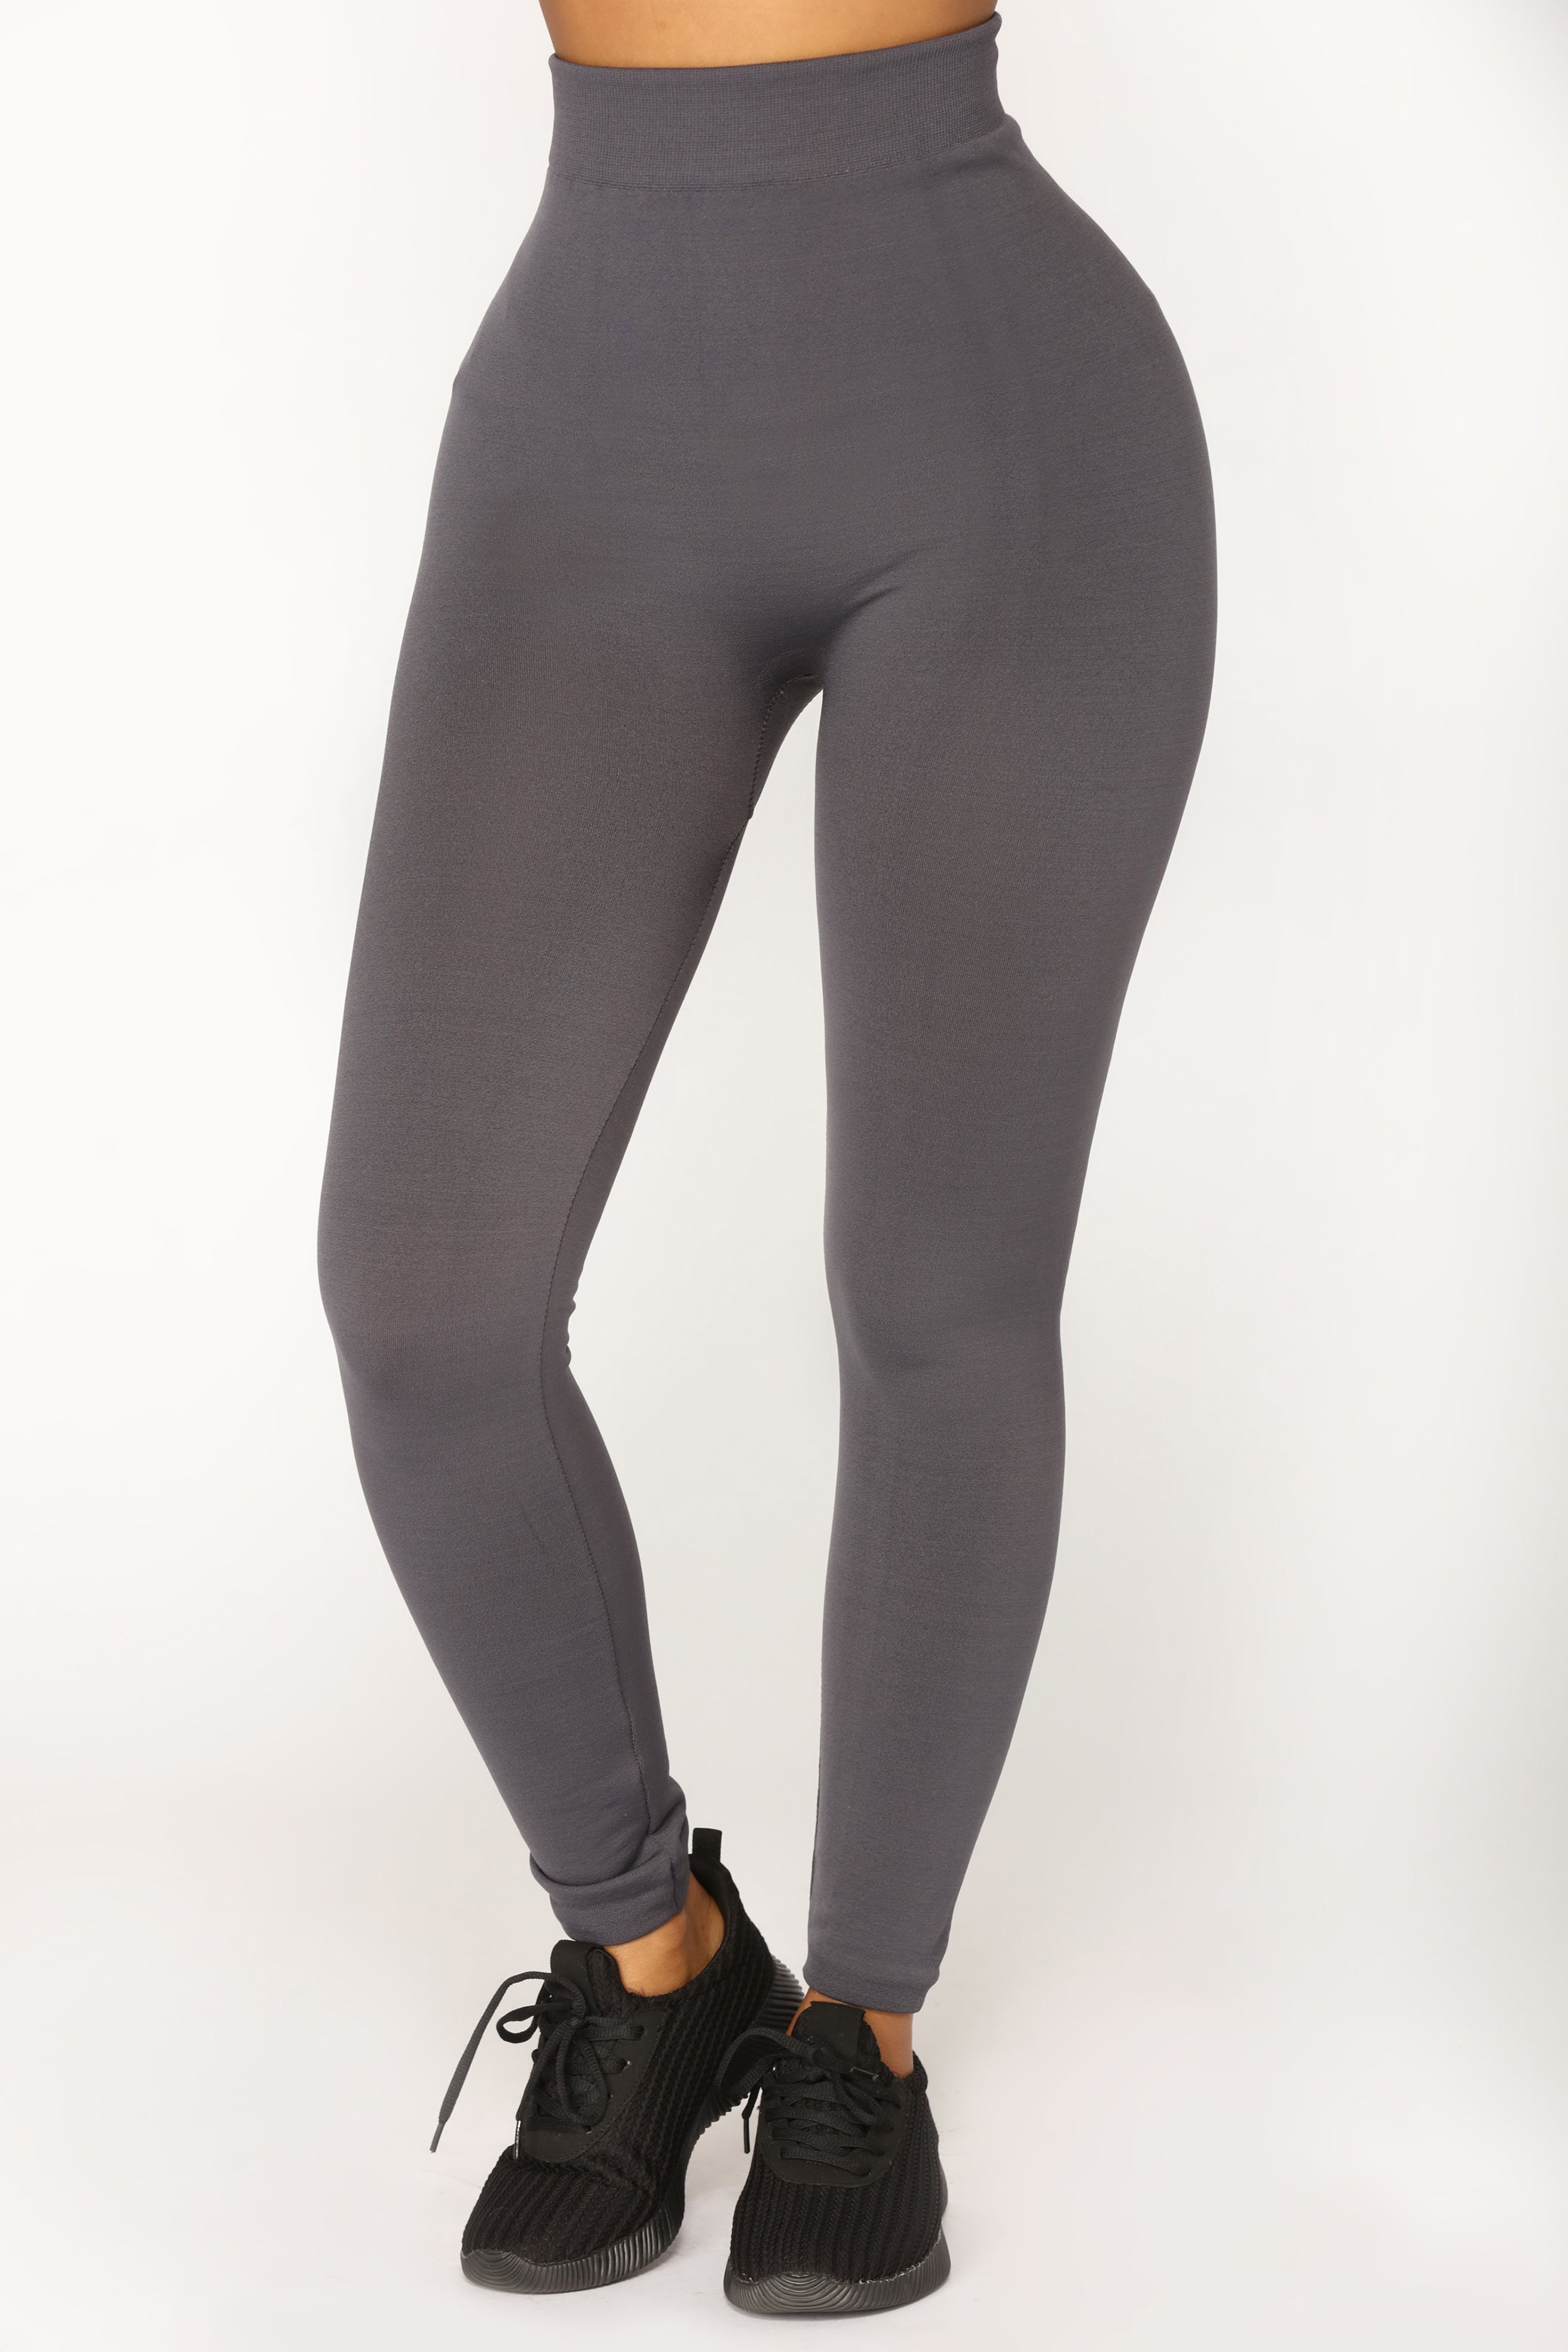 Since Day One Seamless Leggings - Charcoal